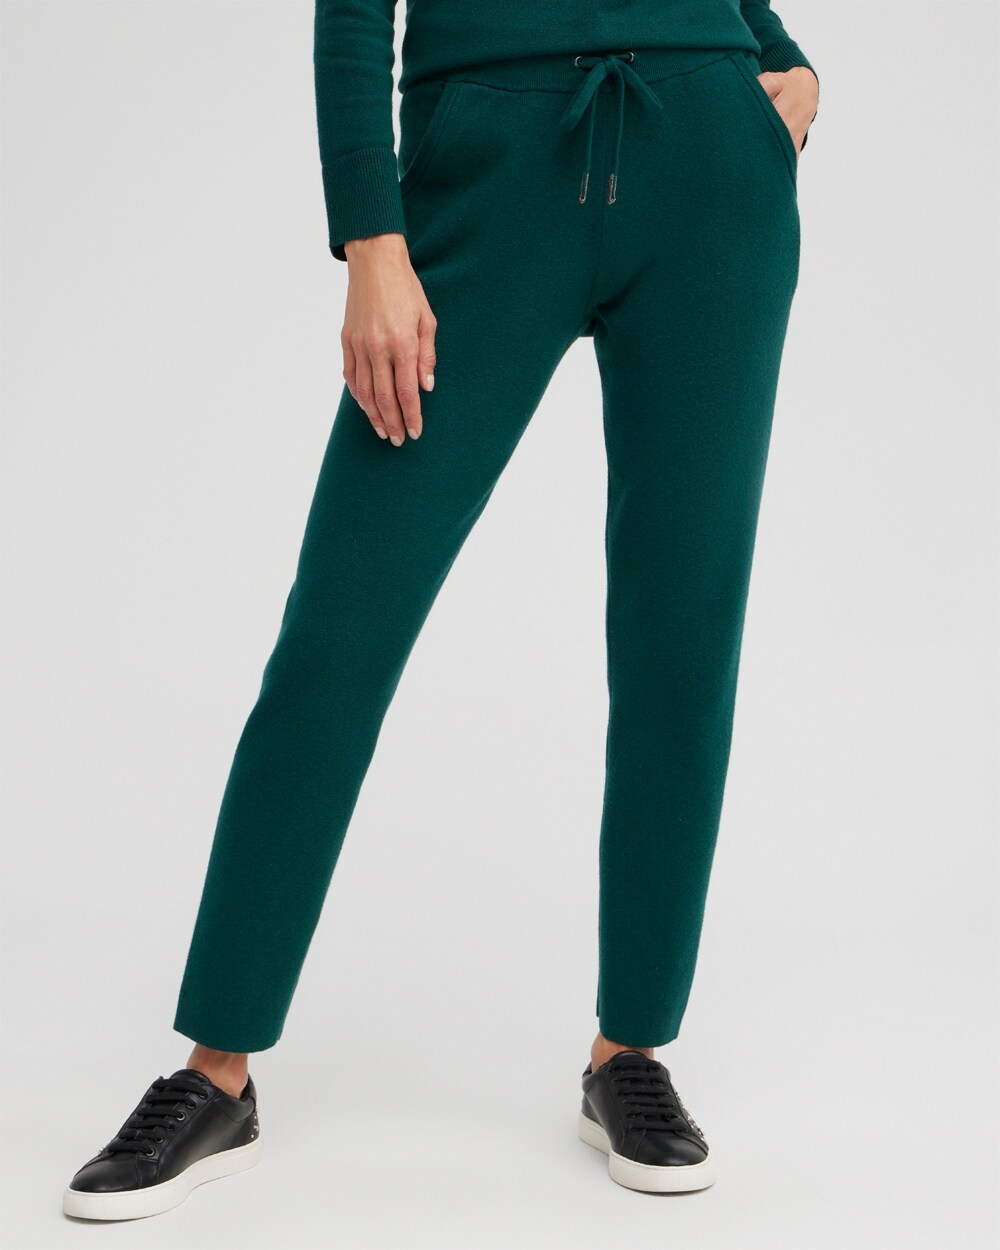 Zenergy Luxe Cashmere Blend Ankle Pants